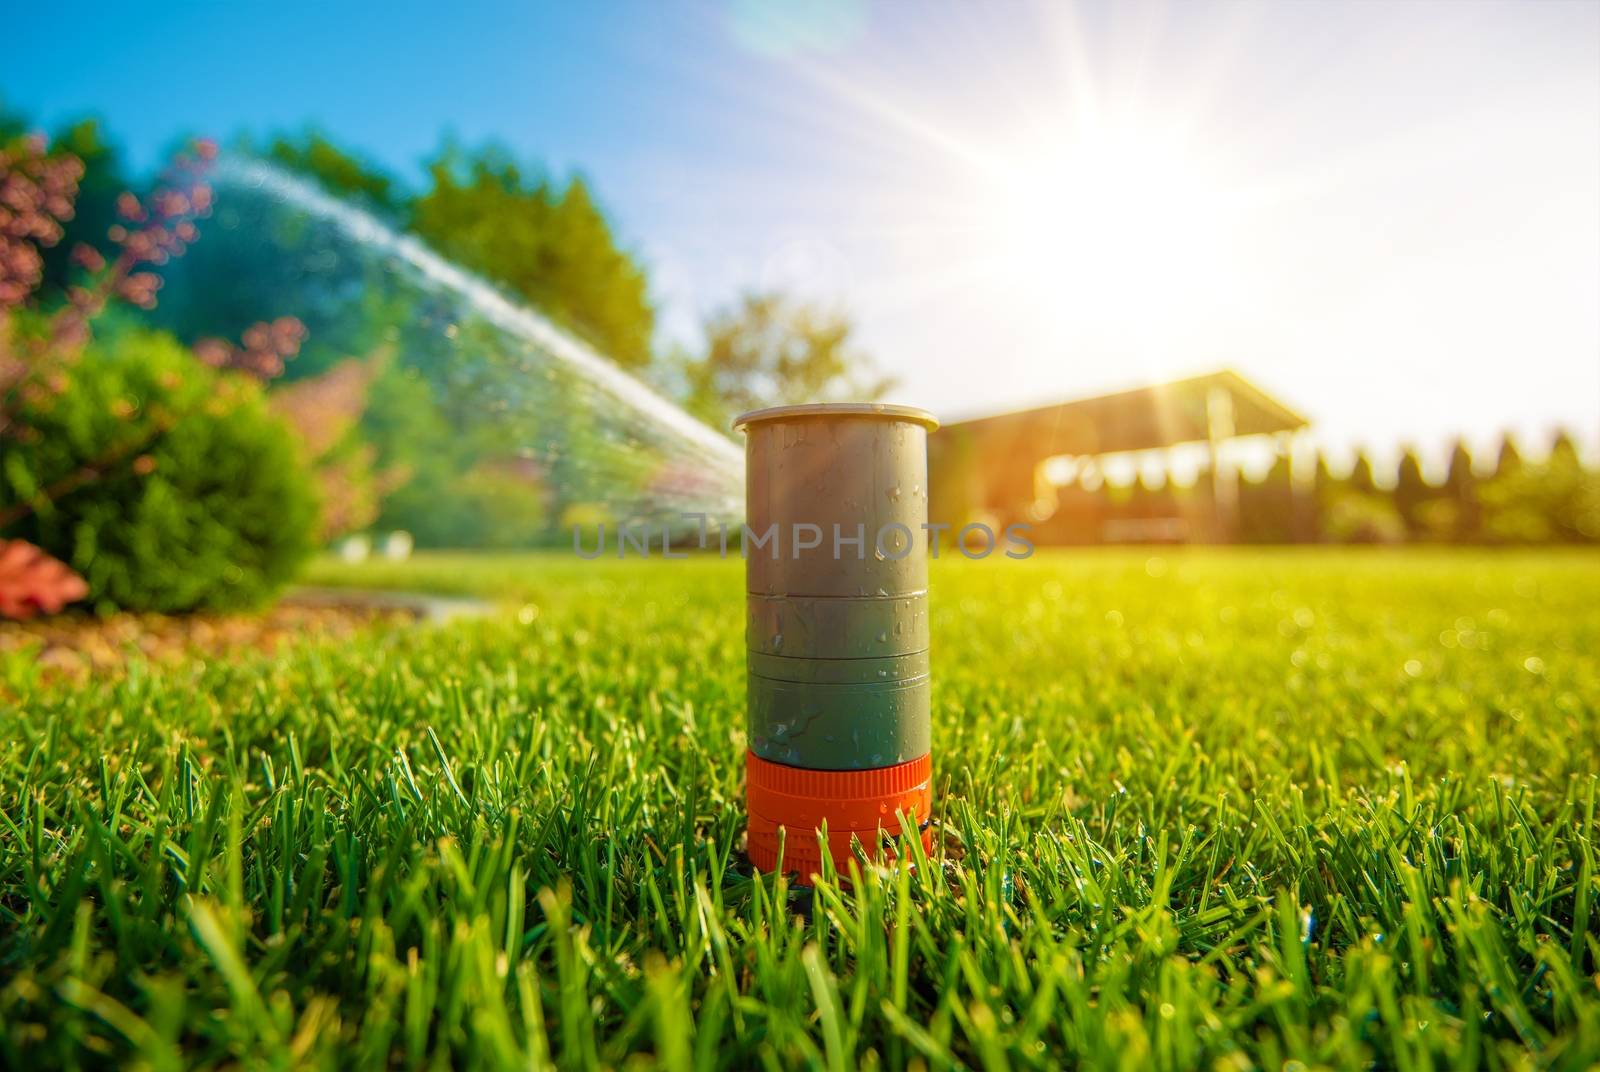 Lawn Sprinkler in Action by welcomia